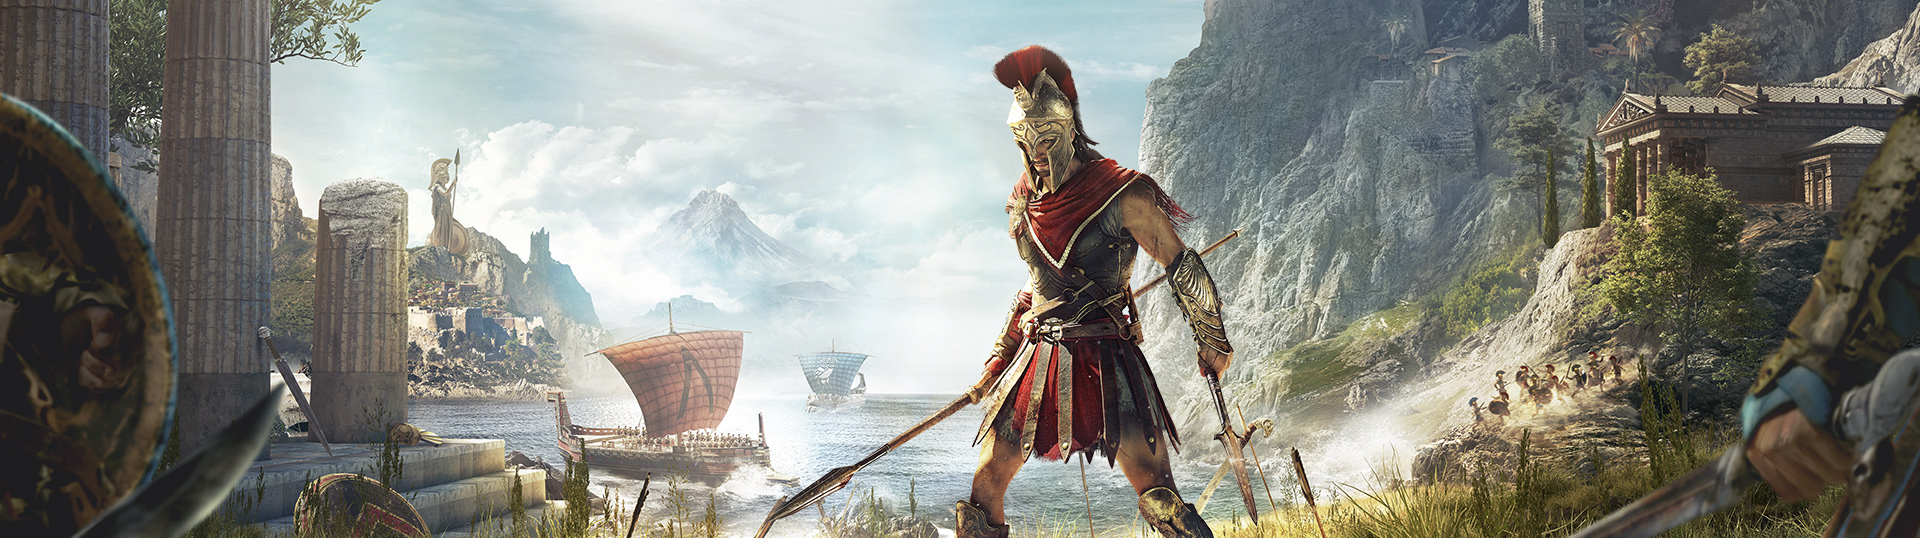 Assassin's Creed Odyssey: Deluxe Edition